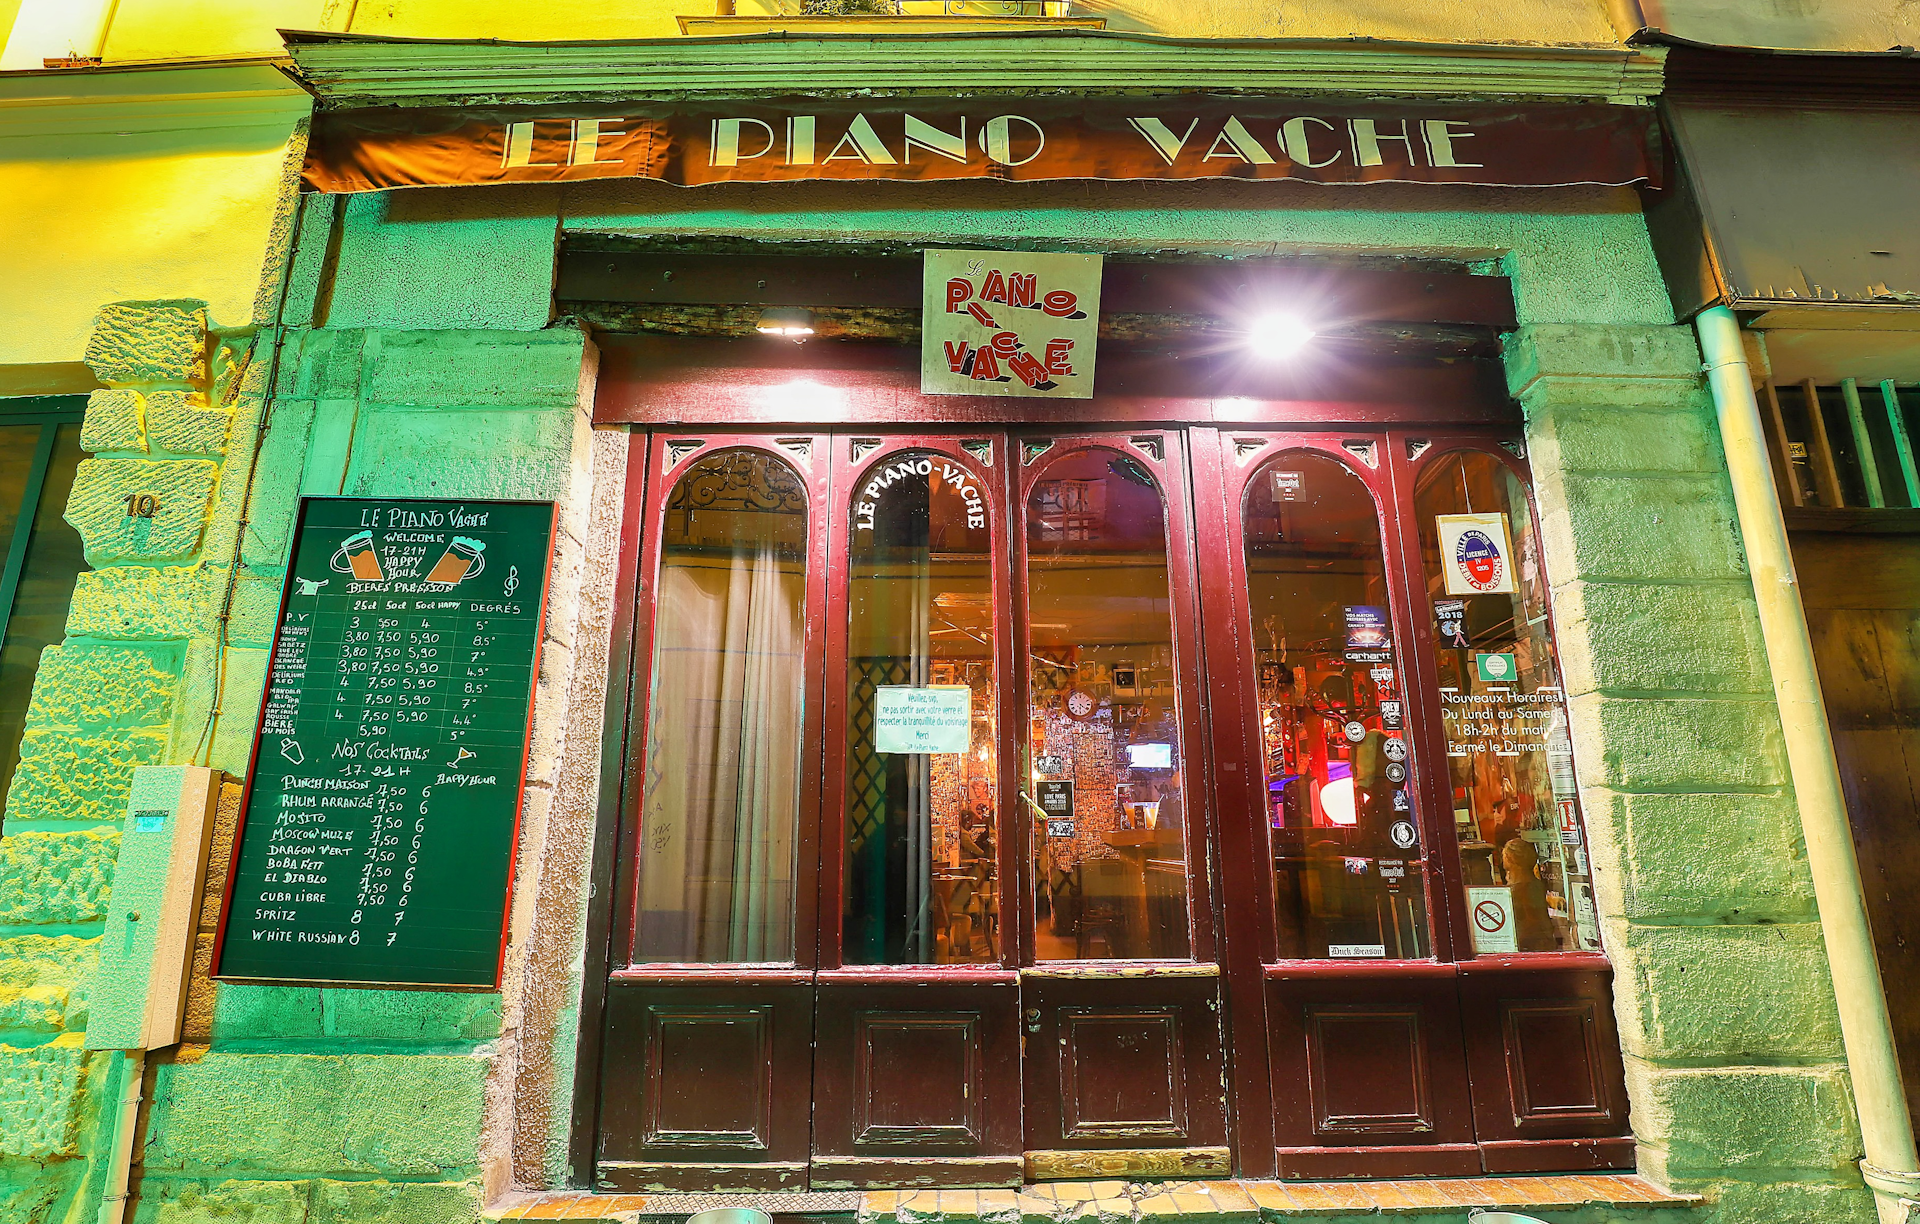 Exterior shot of classic French cafe at night, Le Piano Vache